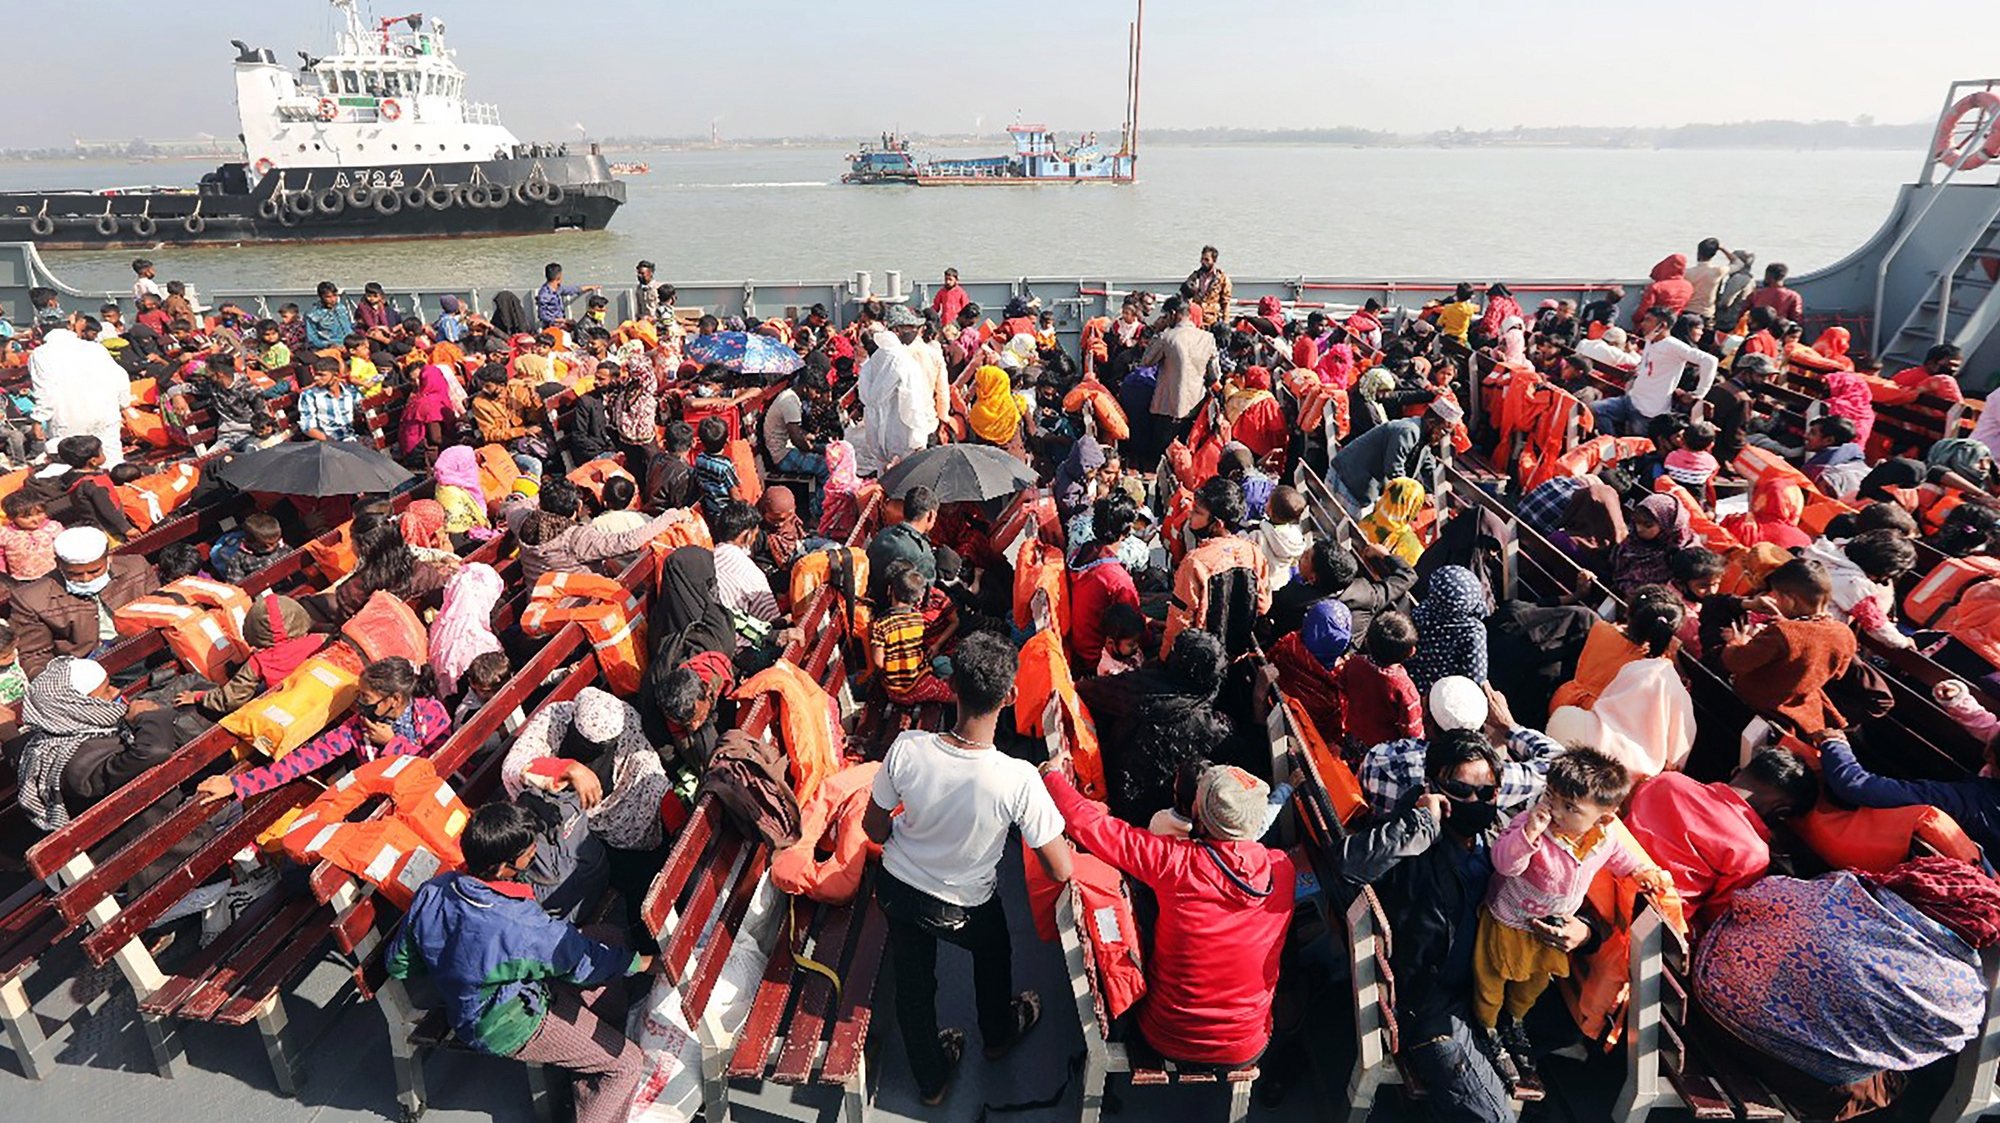 epa08972342 A Rohingya refugees sit on board a naval ship that will take them to Bhashan Char Island, in Chittagong, Bangladesh 29 January 2021. A third group of Rohingya refugees is being relocated to Bhashan Char island under the district of Noakhali.  EPA/STR